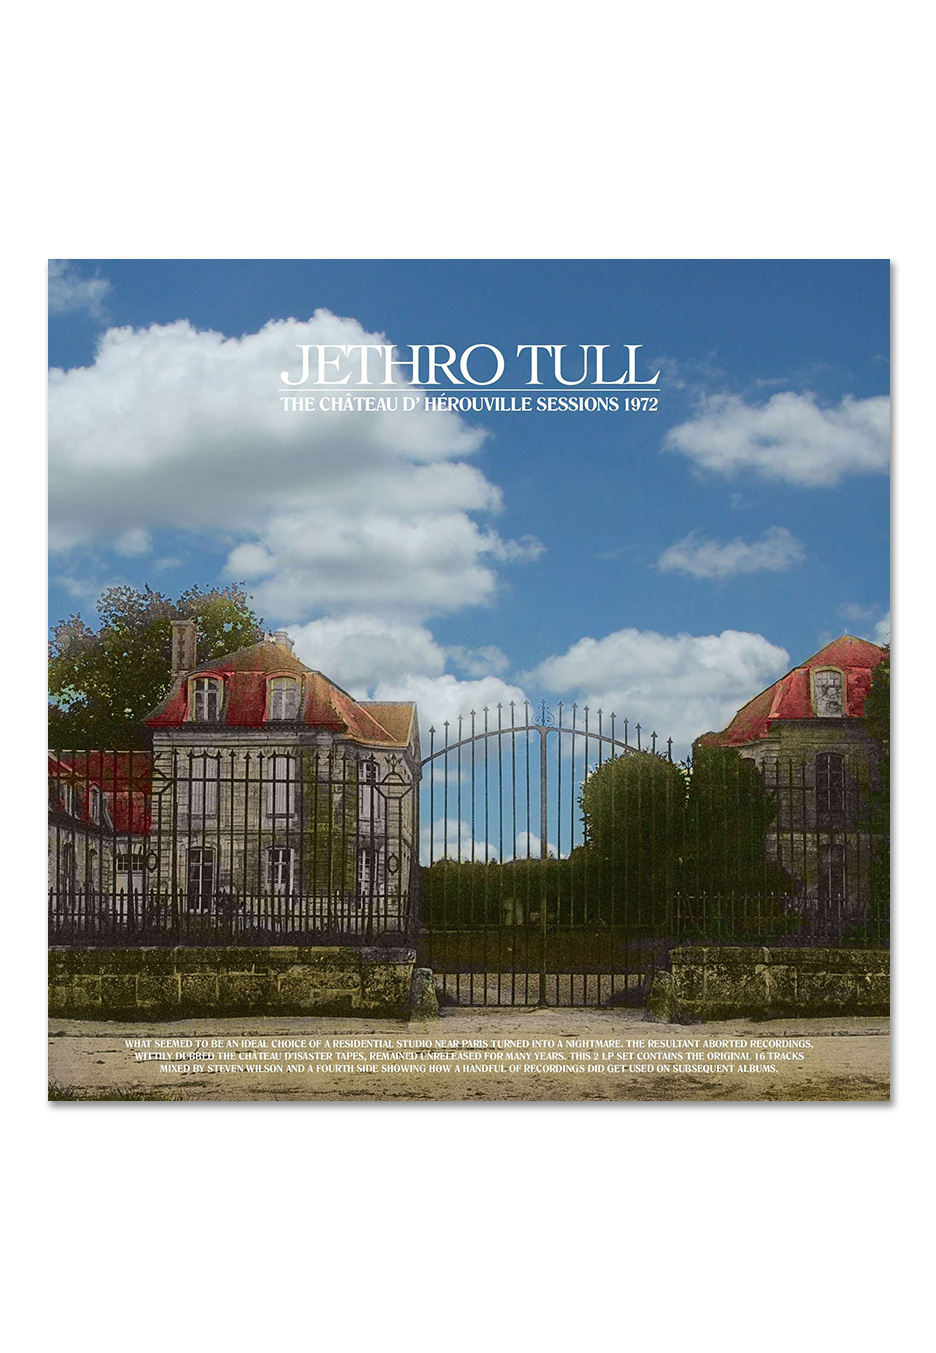 Jethro Tull - The Chateau D'Herouville Sessions - 2 Vinyl